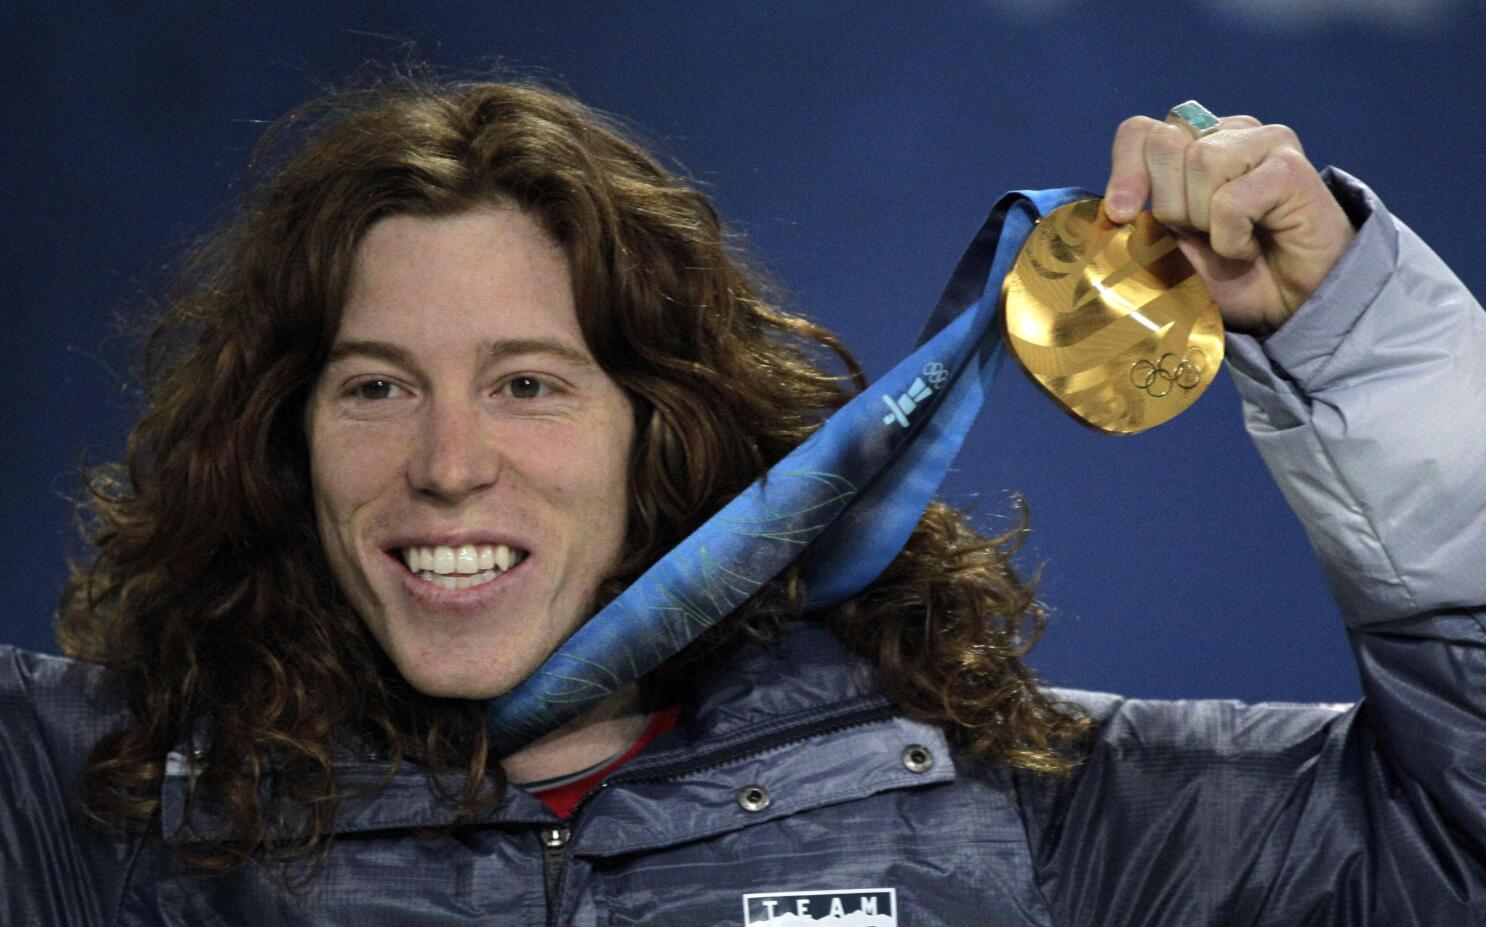 Shaun White Says He's 'Ready to Pass the Torch to the Next Generation